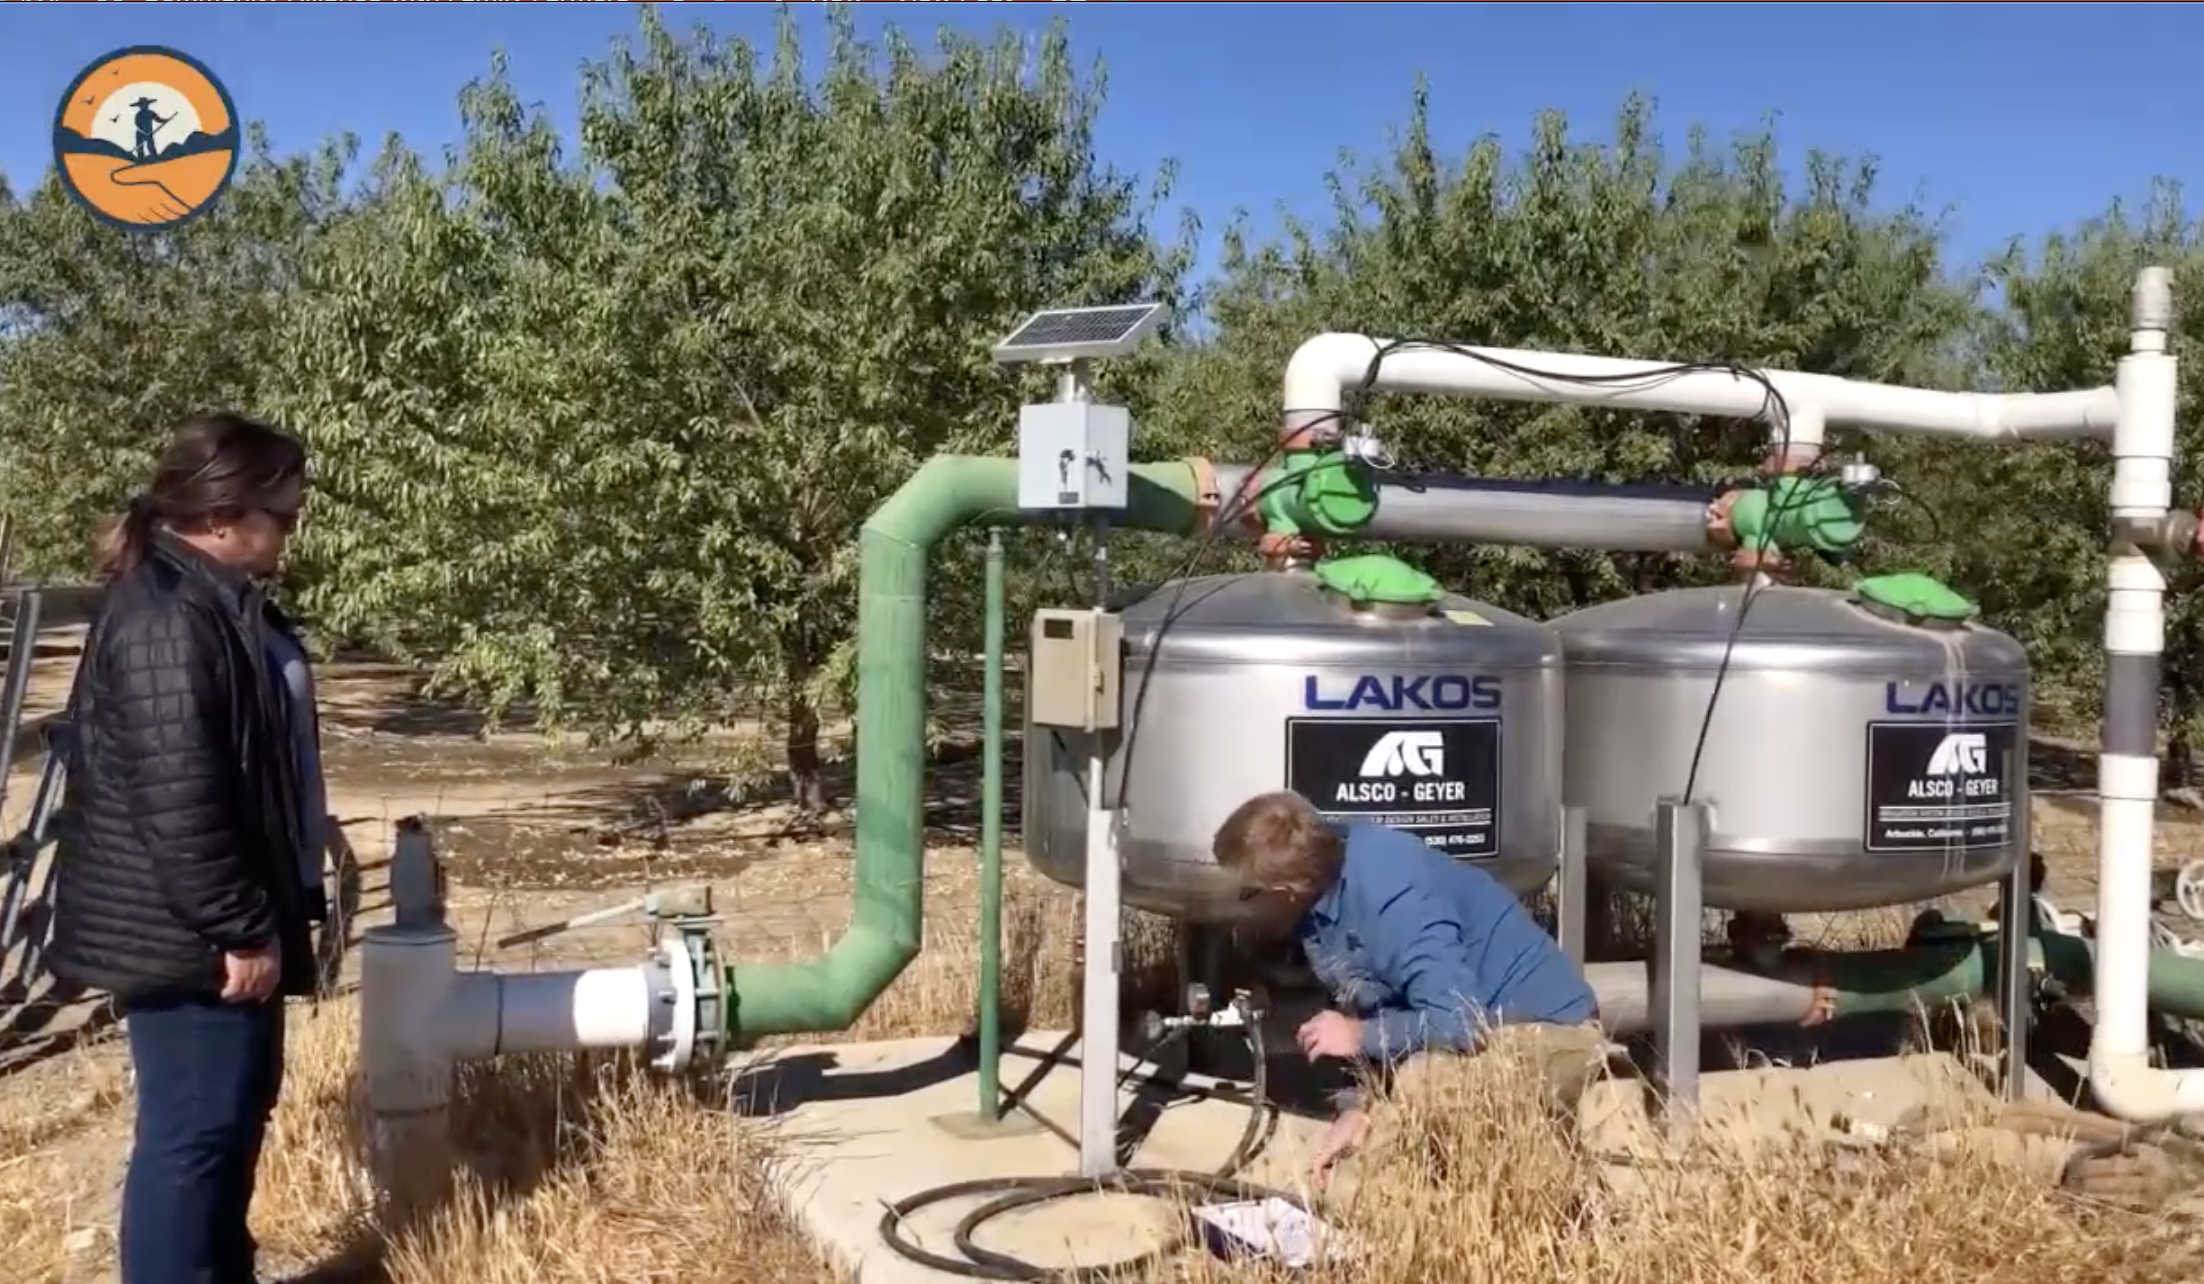 Evaluating your Irrigation System with the Mobile Irrigation Lab (video + Q&A)